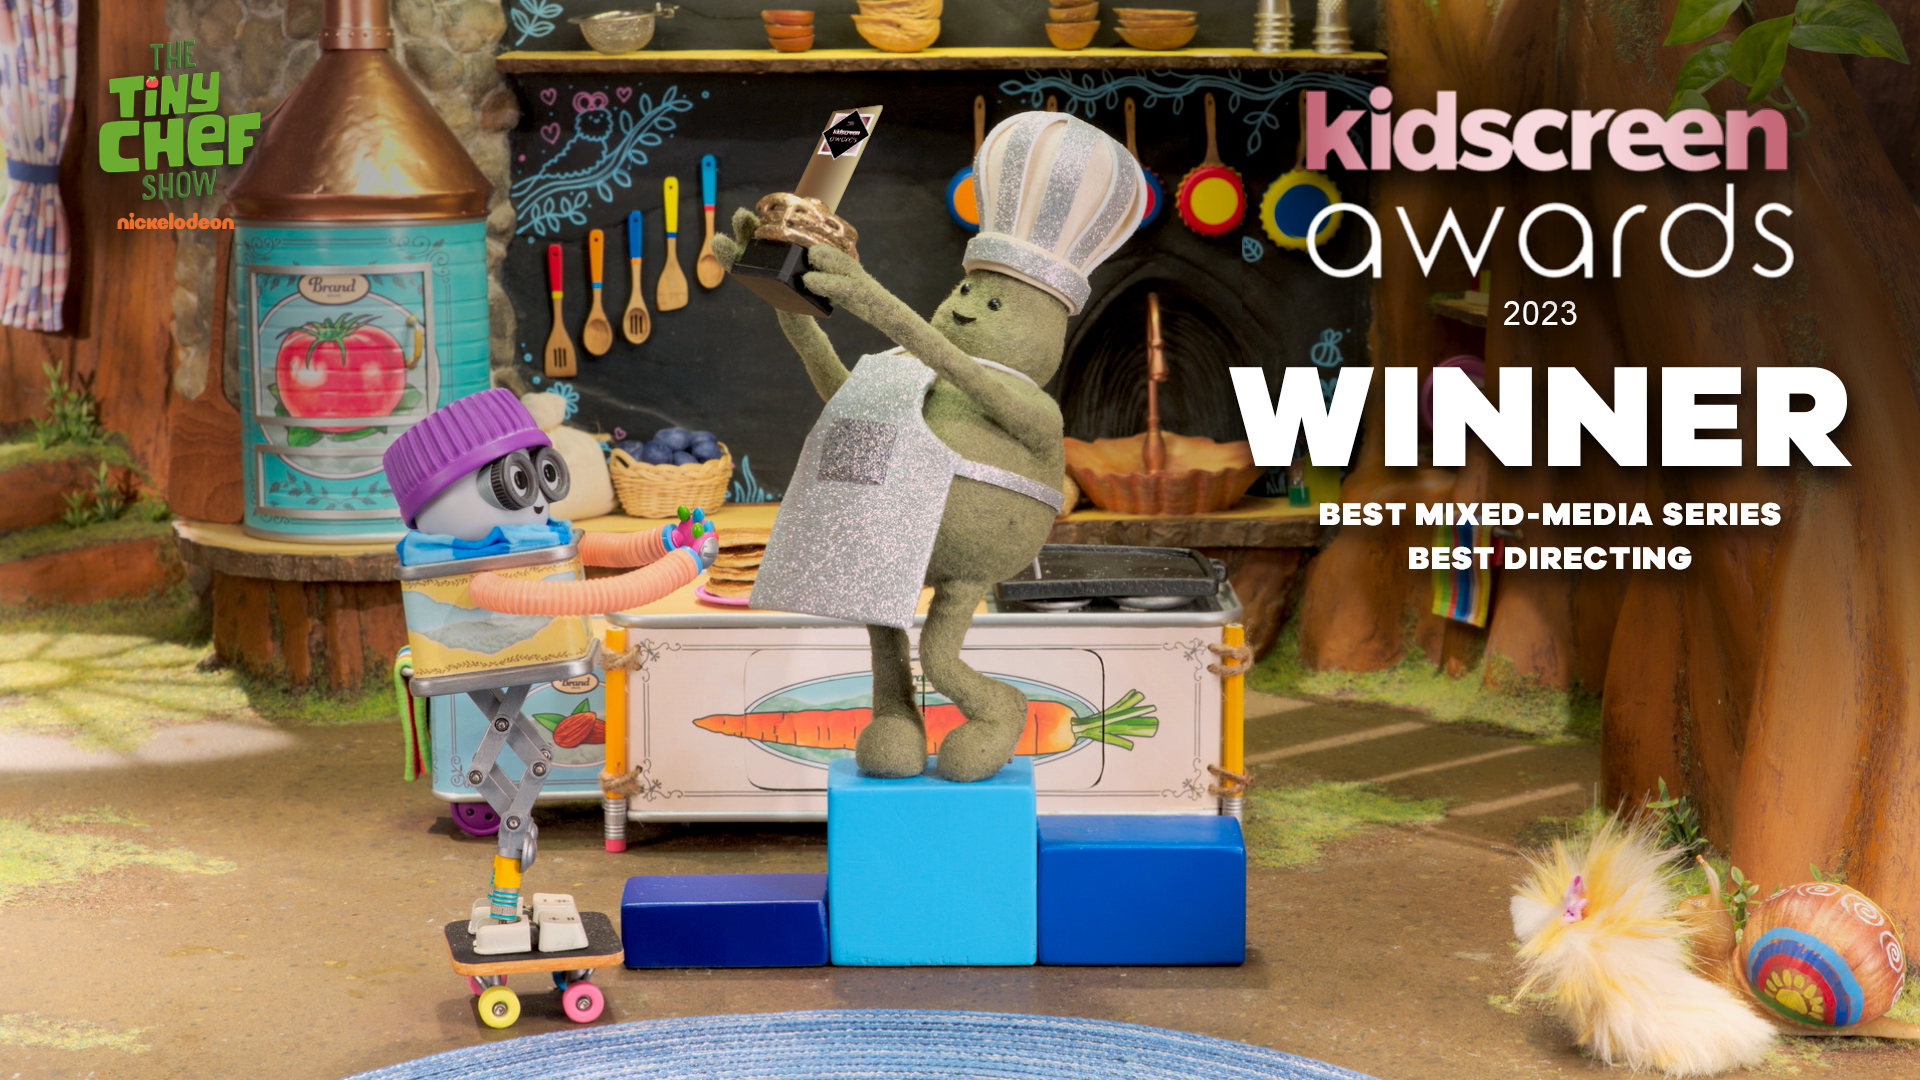 The Tiny Chef Show wins at Kidscreen Awards